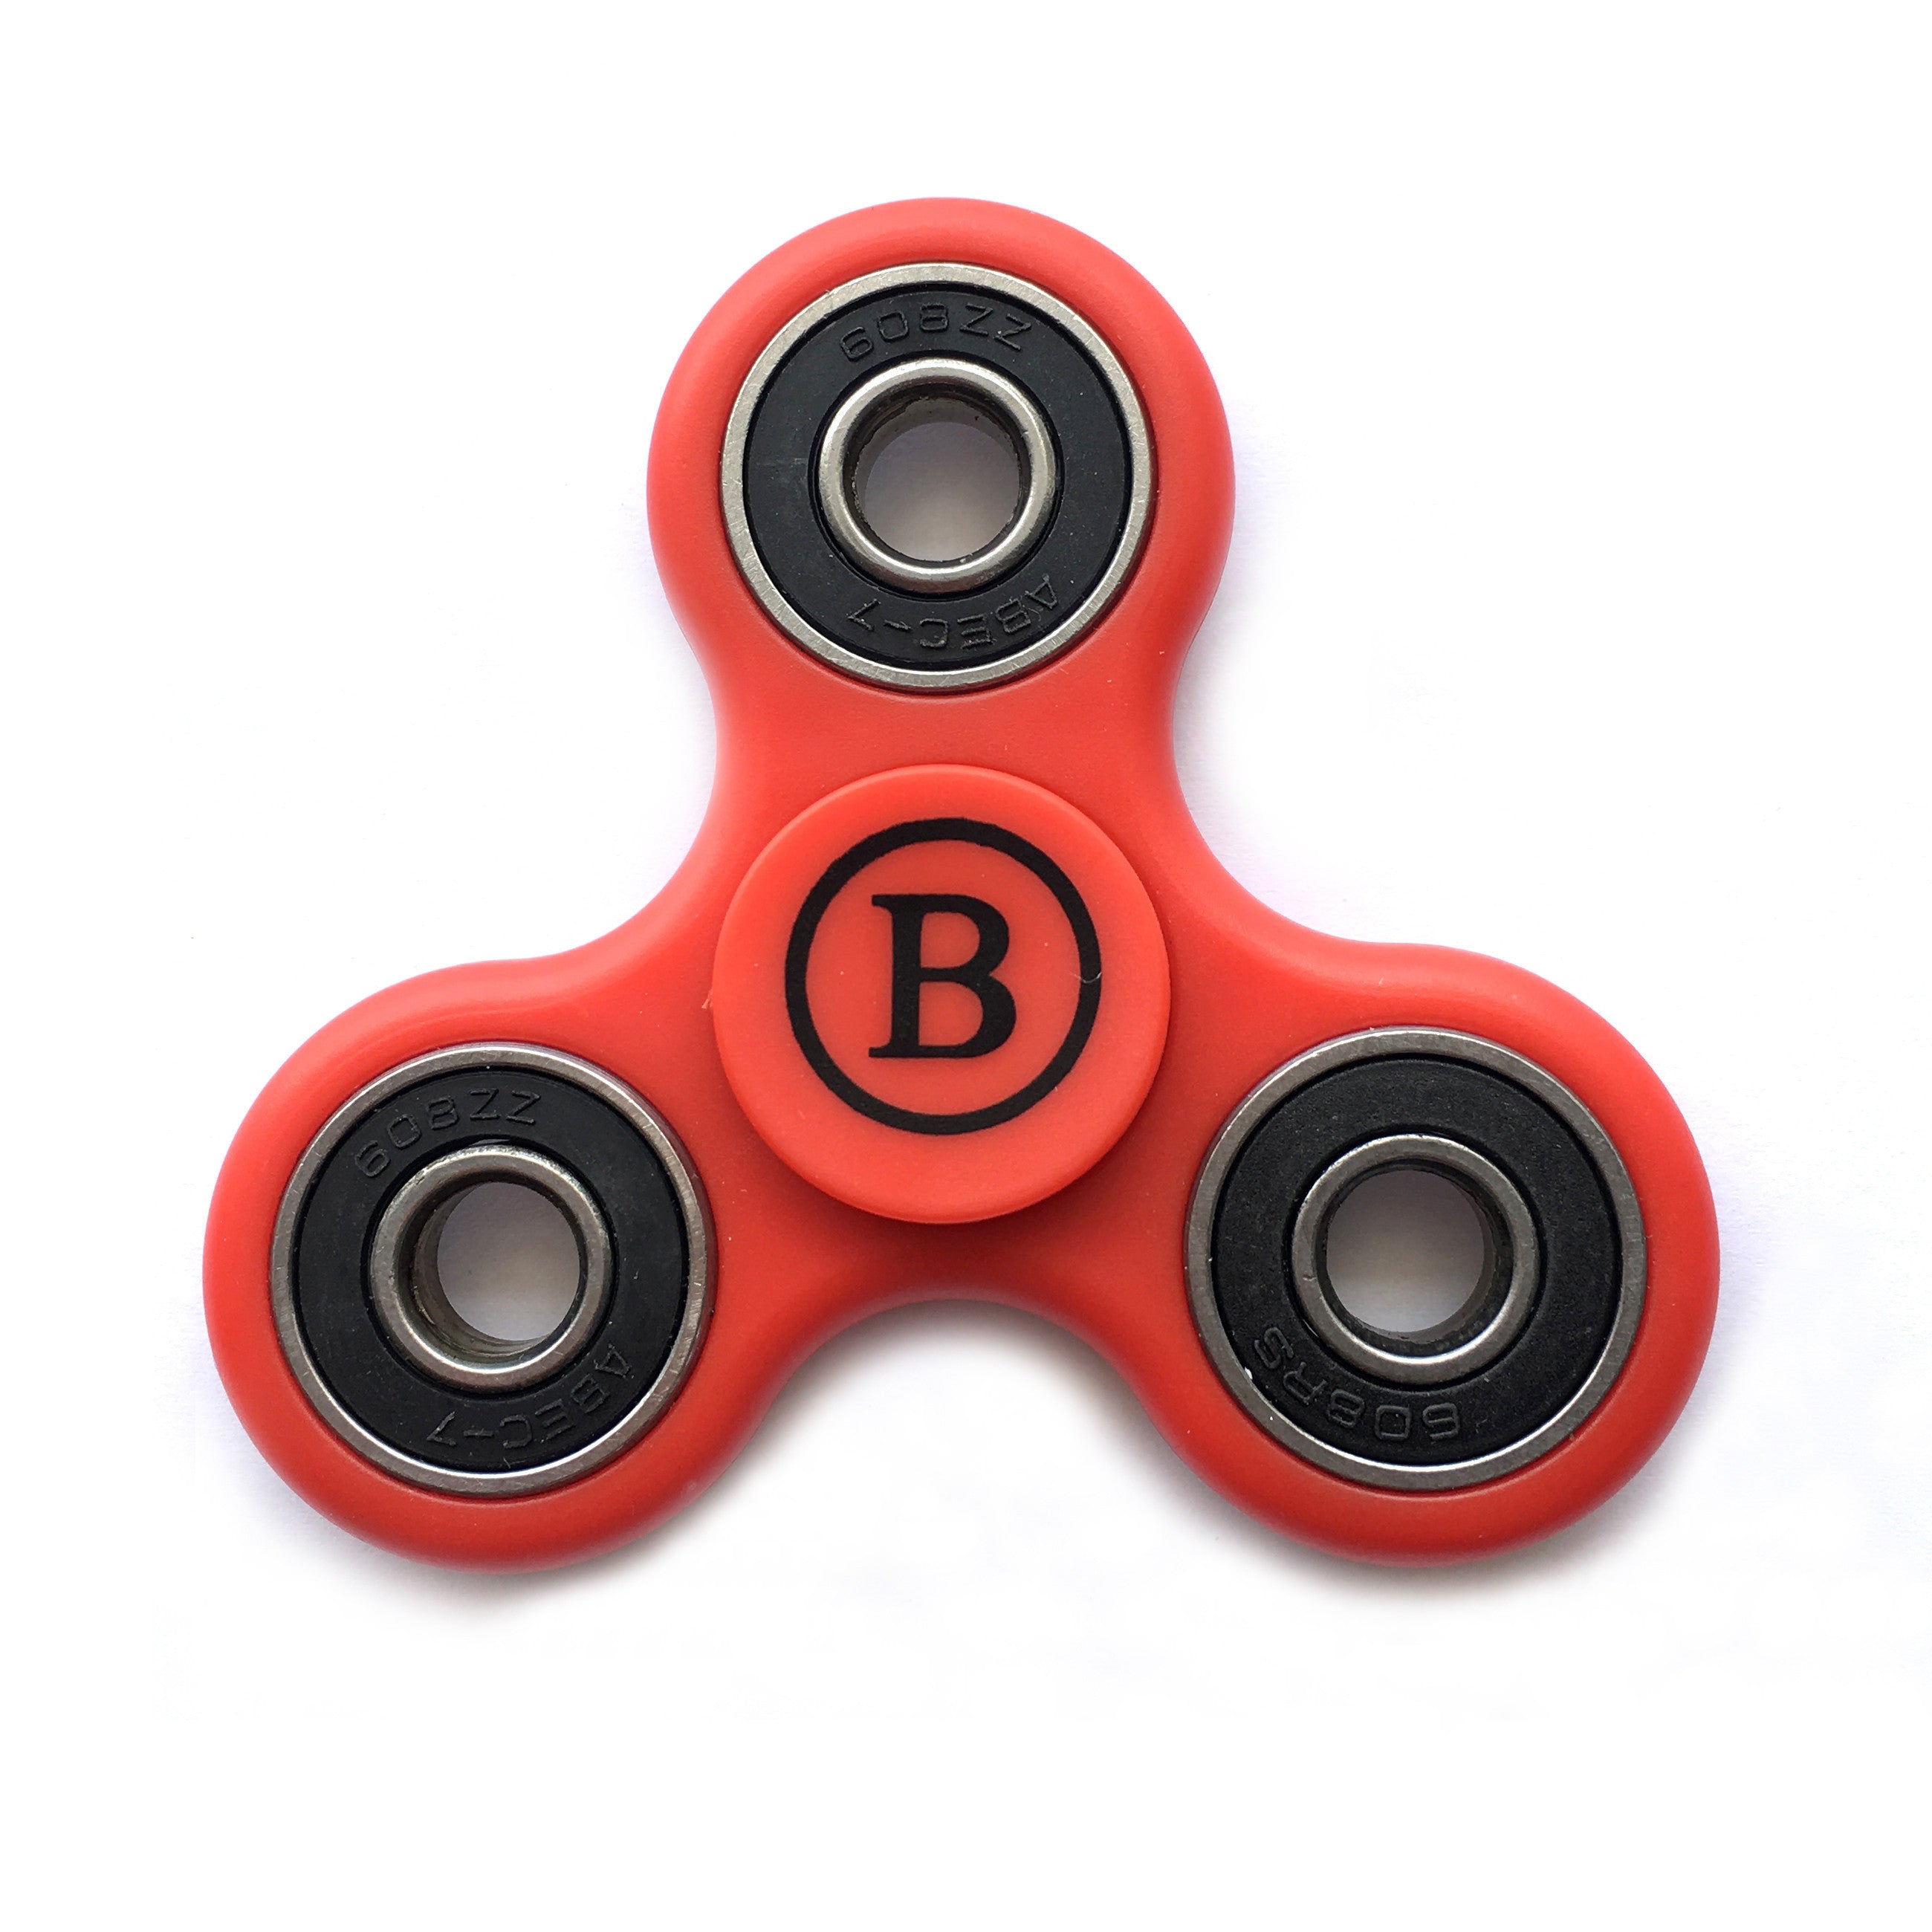 Fidget Hand Spinner High Speed Steel Bearing, Adhd Focus Anxiety Relief Toy - Red